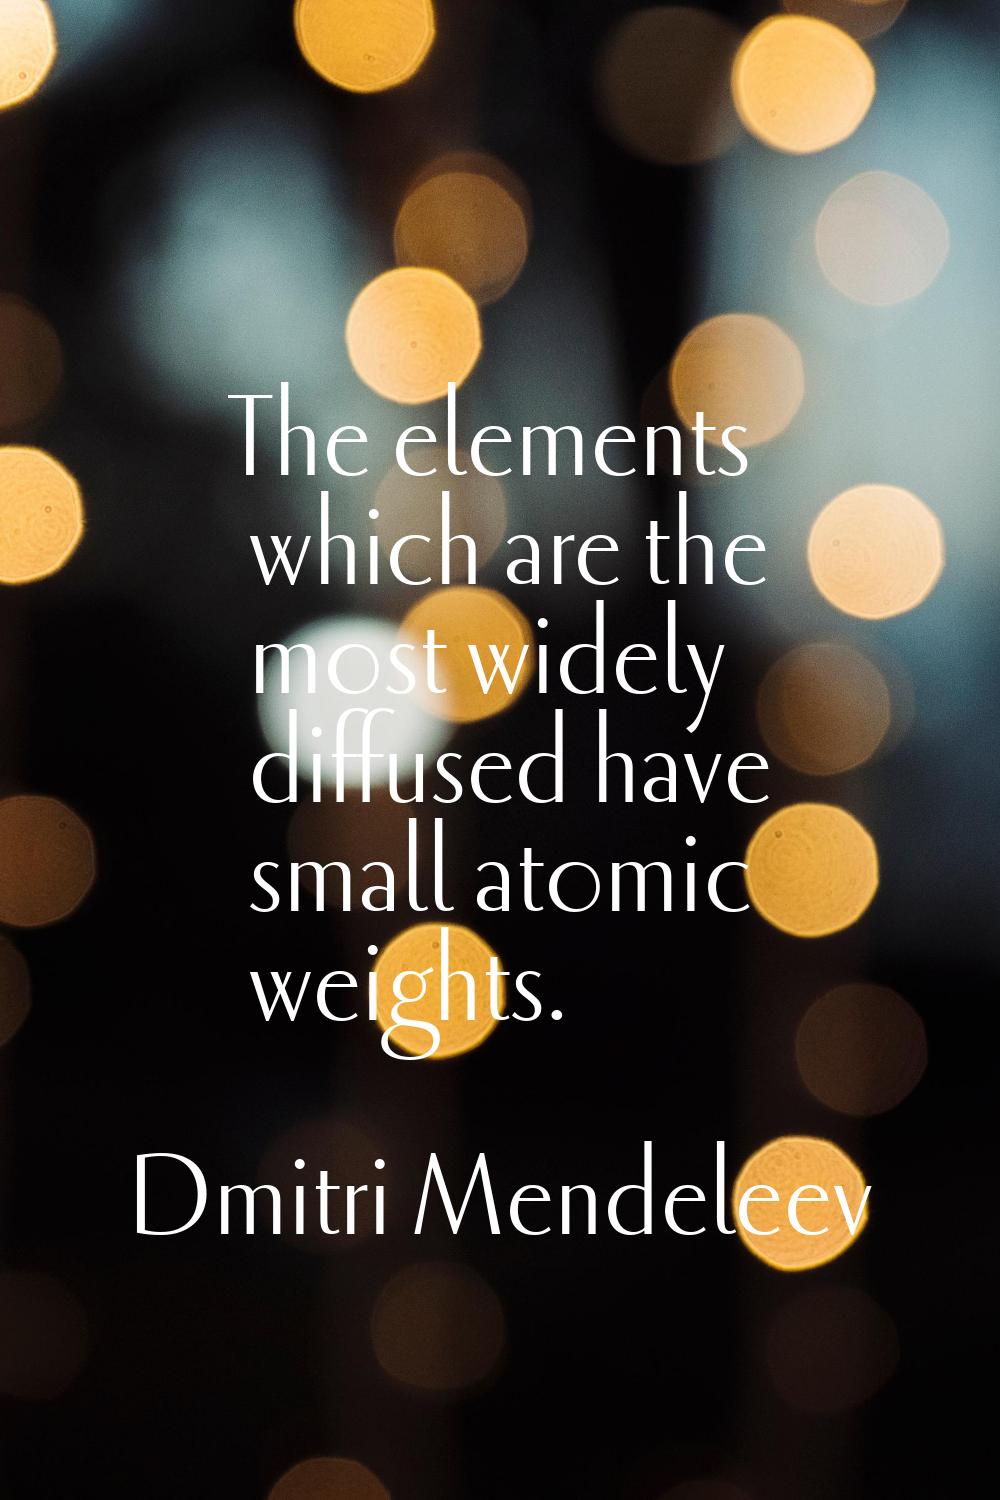 The elements which are the most widely diffused have small atomic weights.